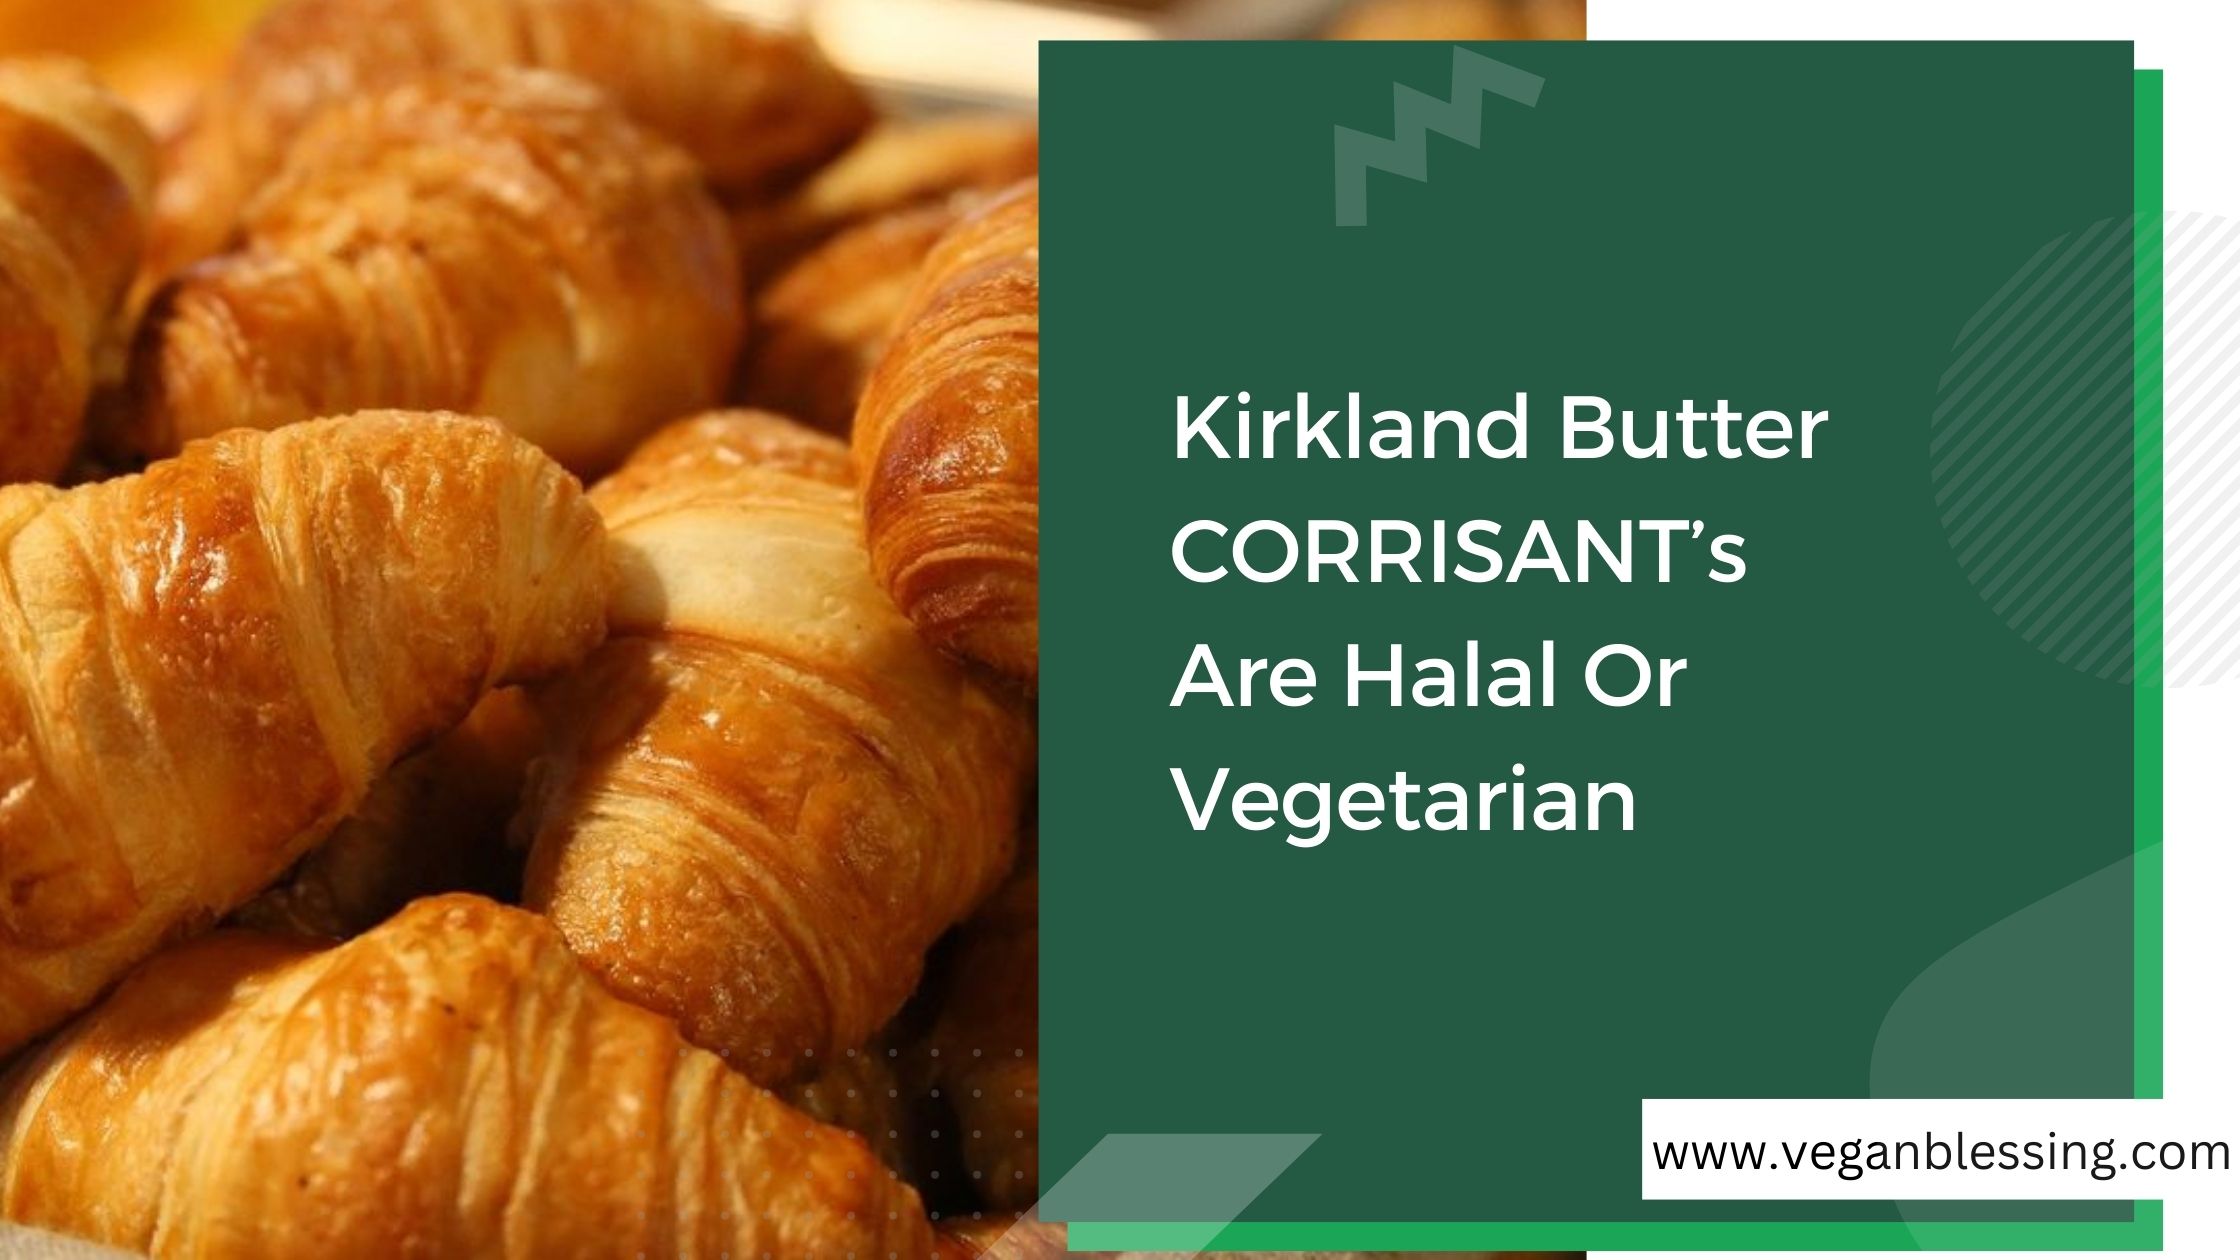 Kirkland Butter CORRISANT’s Are Halal Or Vegetarian Kirkland Butter CORRISANTs Are Halal Or Vegetarian